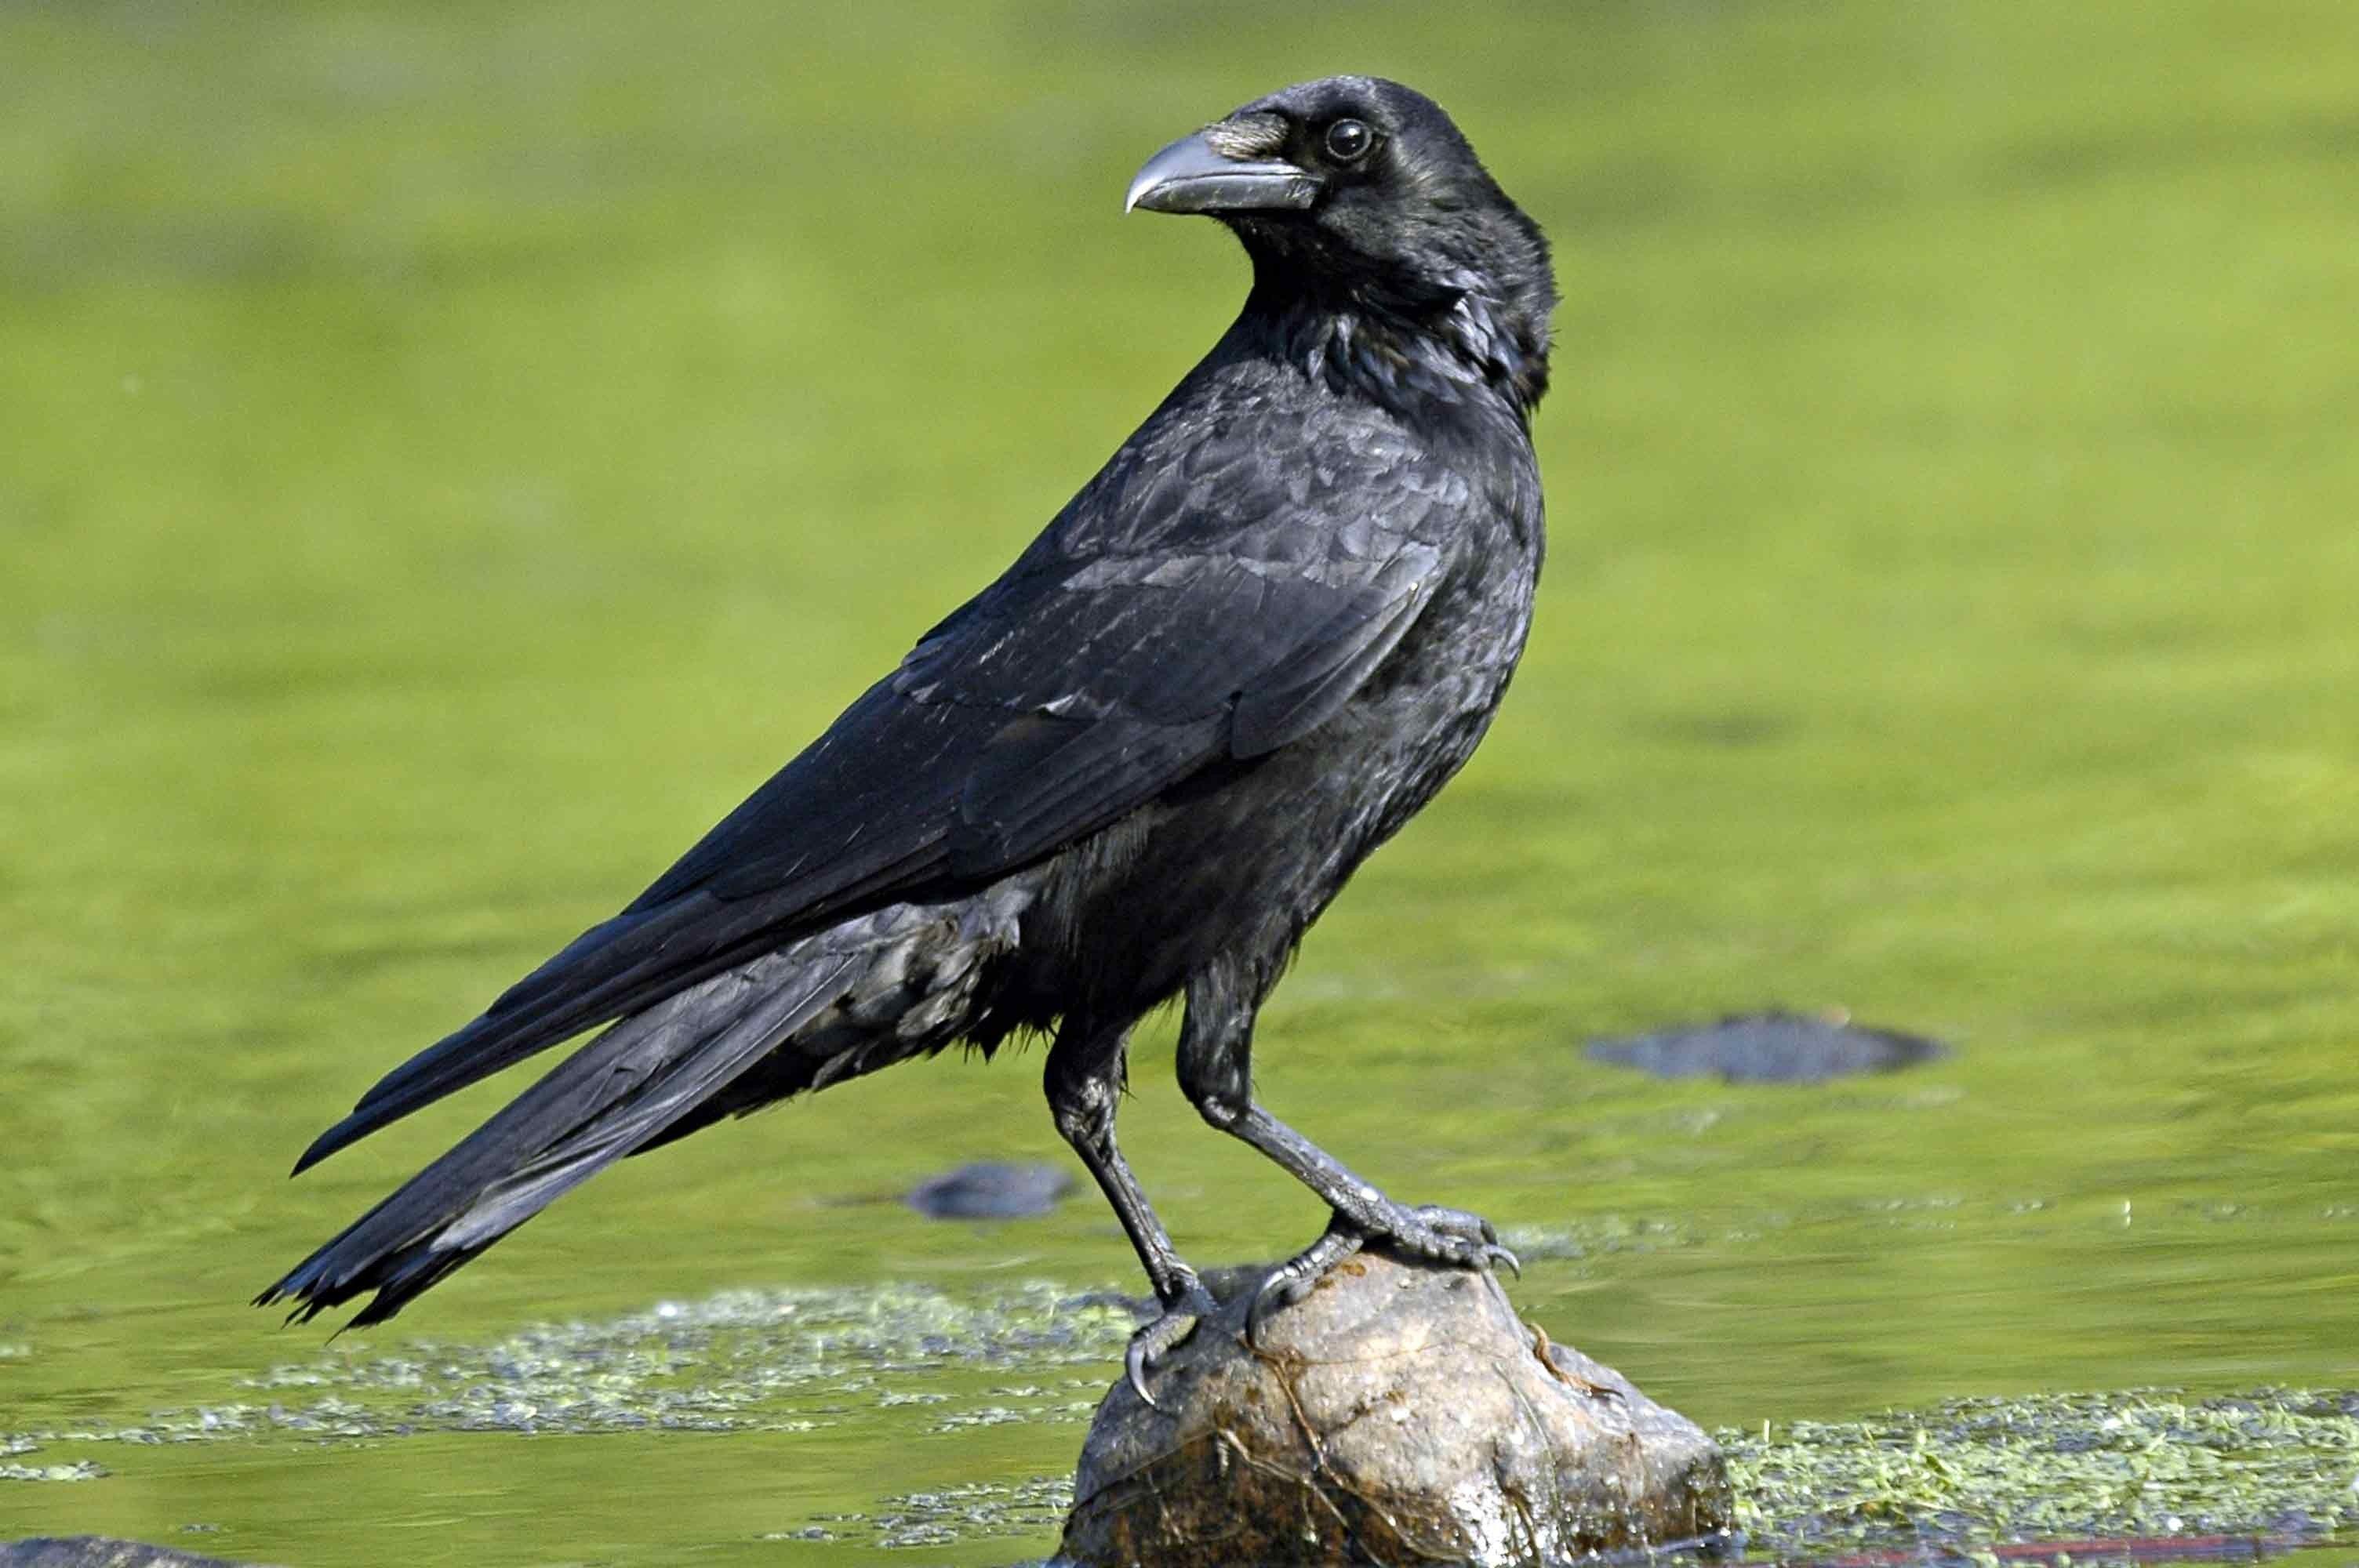 Crow HD Photo. Bird Wallpaper Image Picture Download